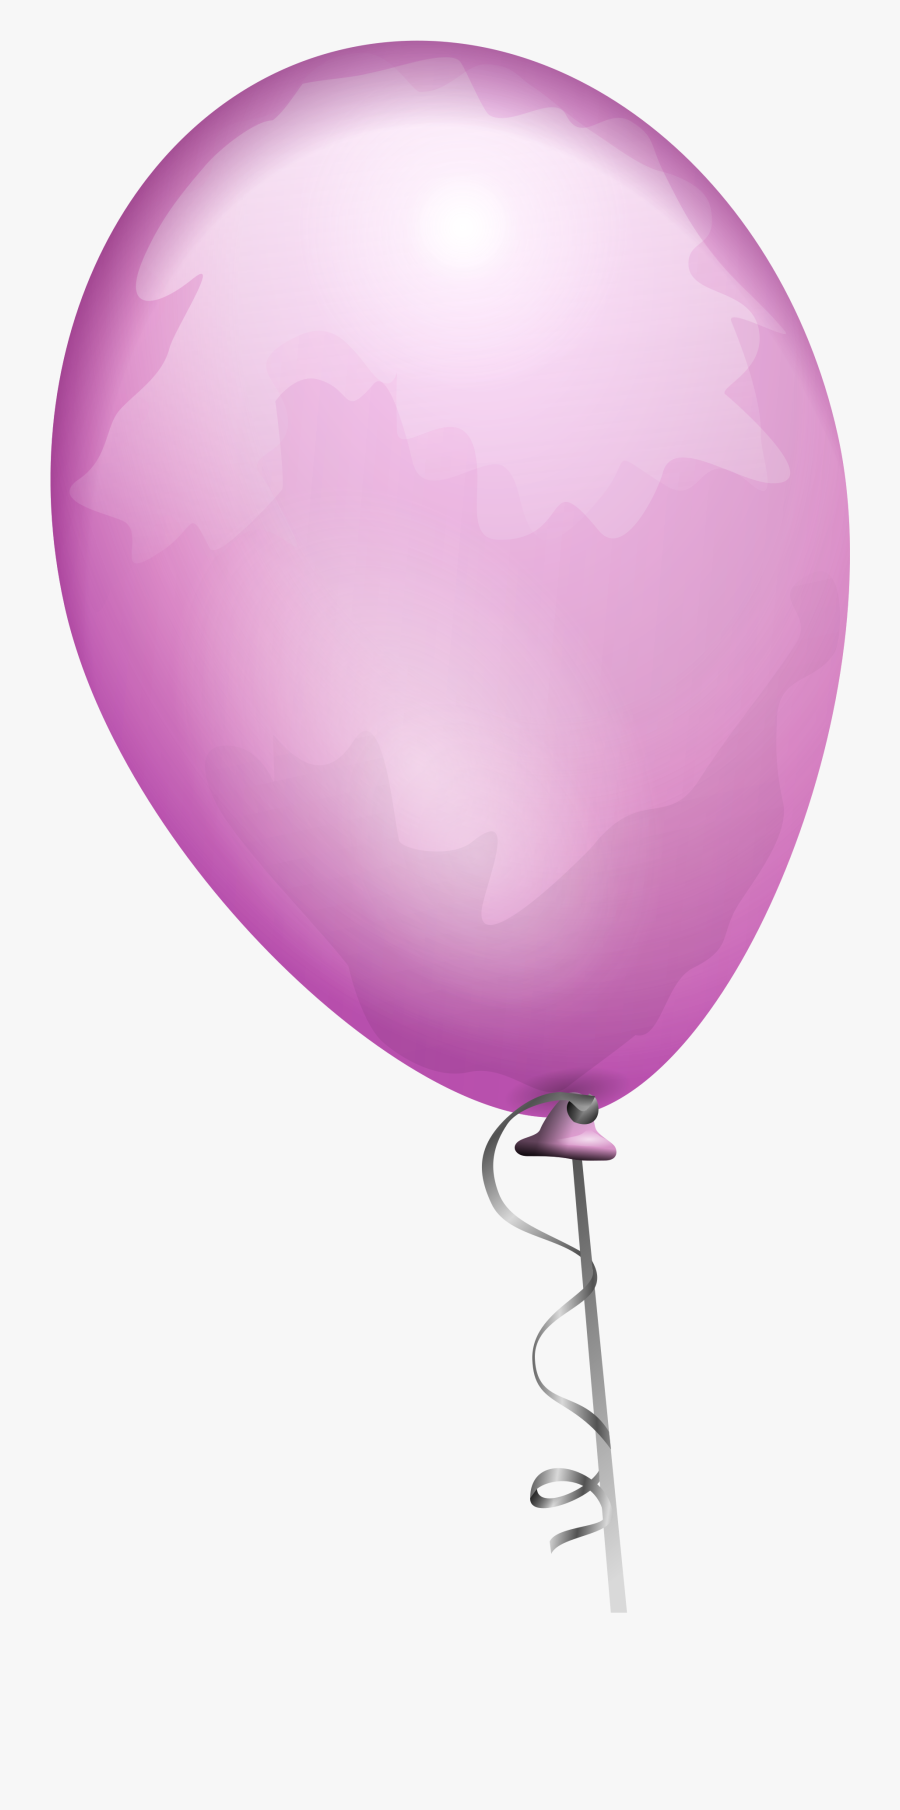 Purple Toy Balloon - Purple Balloons Images Png, Transparent Clipart